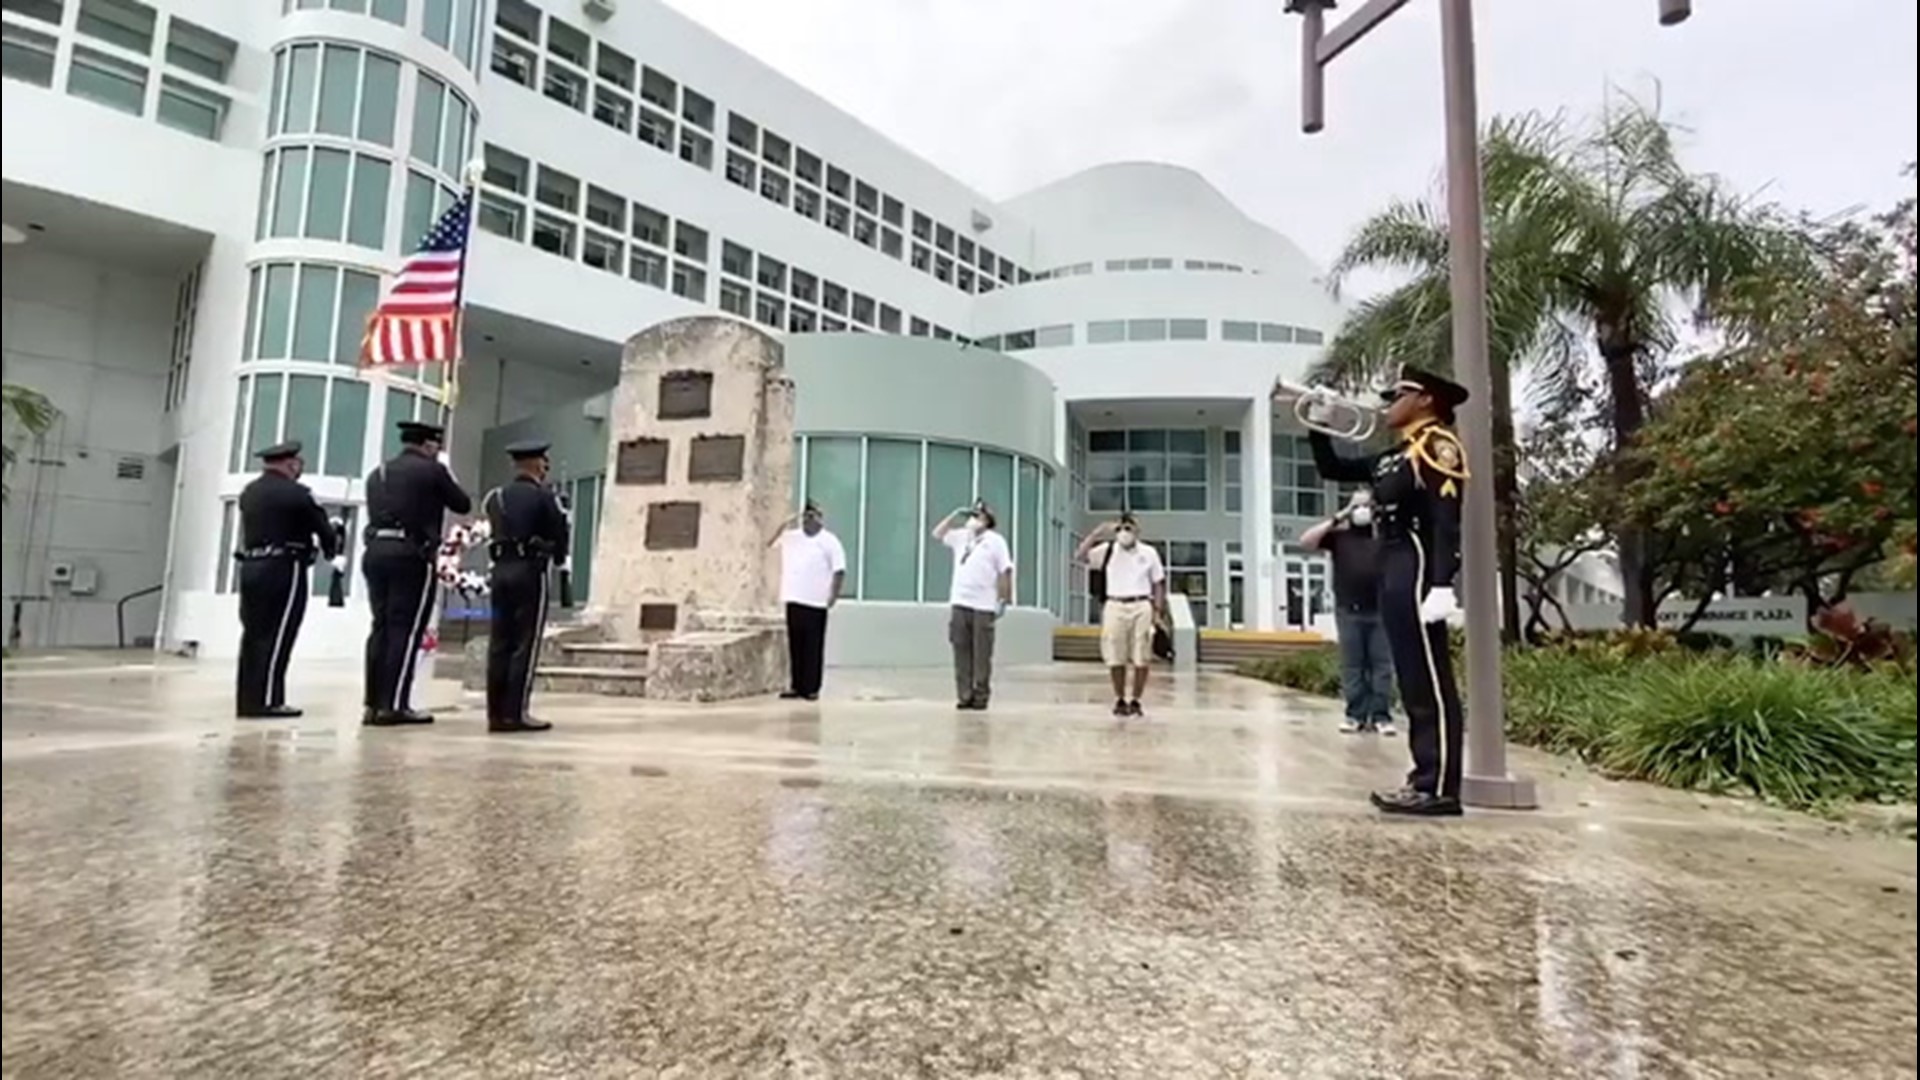 The Miami Beach police hosted a wreath-laying ceremony to honor the brave fallen servicemen and women in the middle of a rainy Memorial Day holiday on May 25.